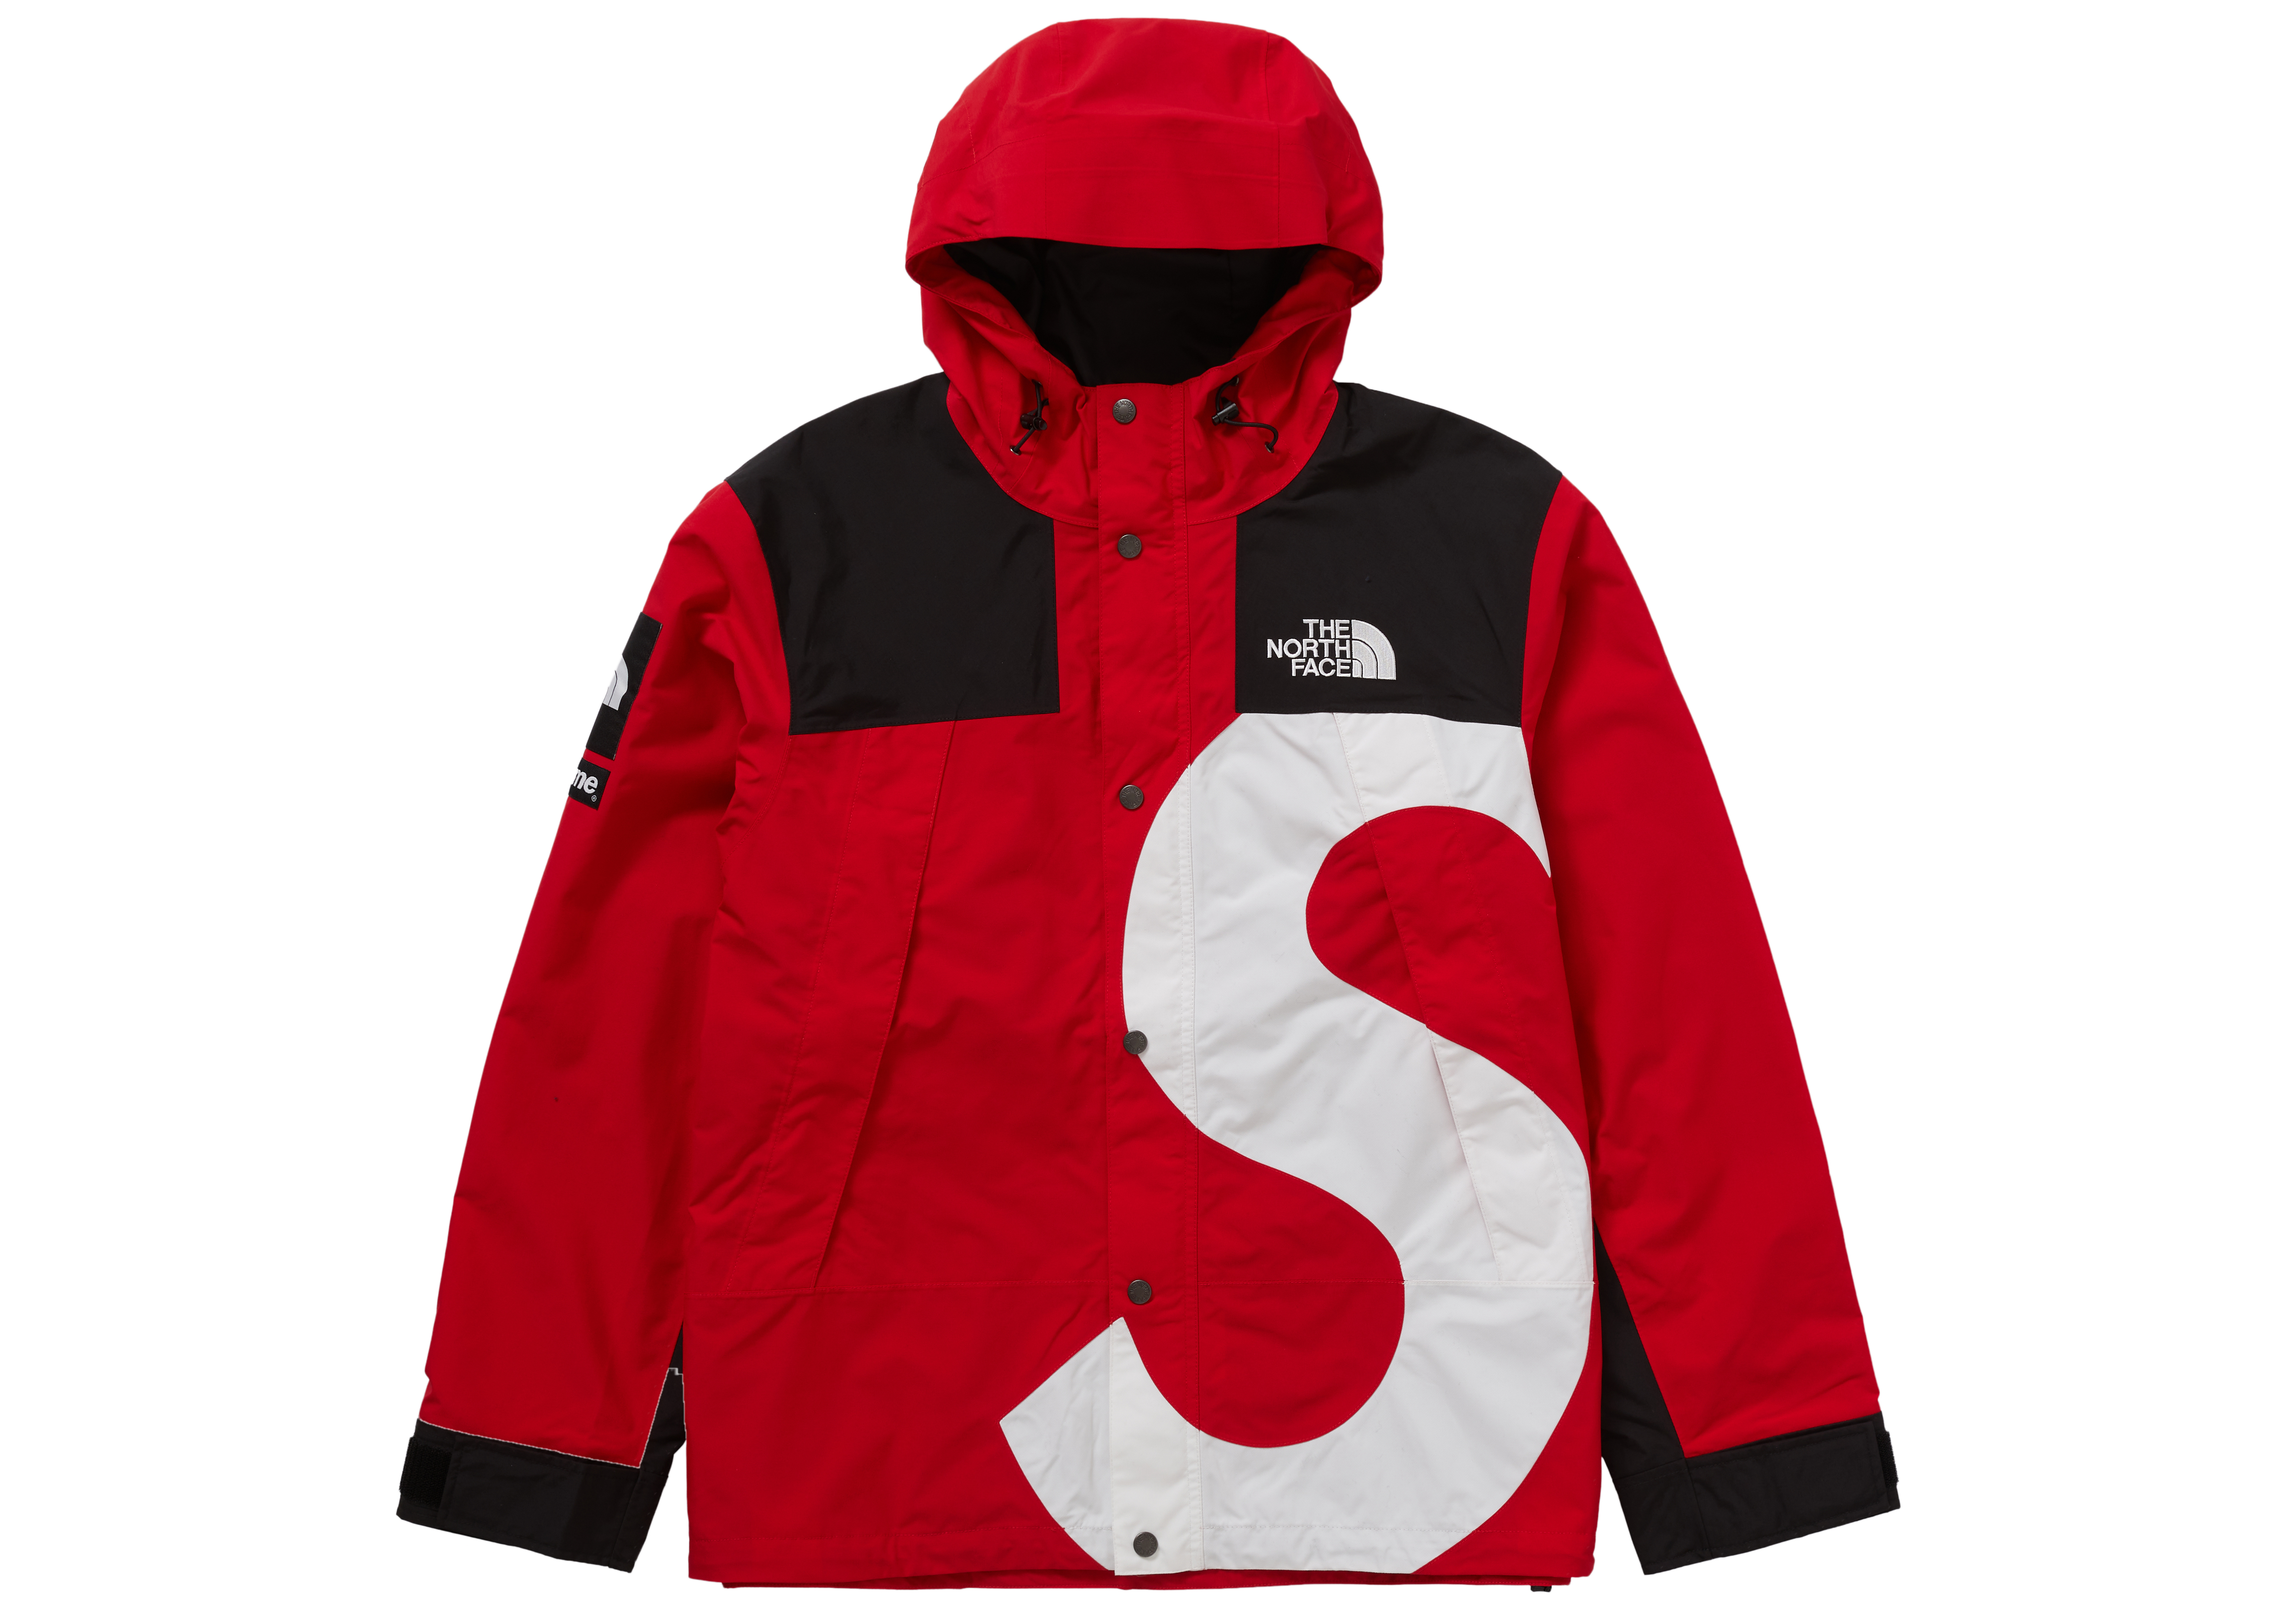 M Supreme THE NORTH FACE Mountain JACKET